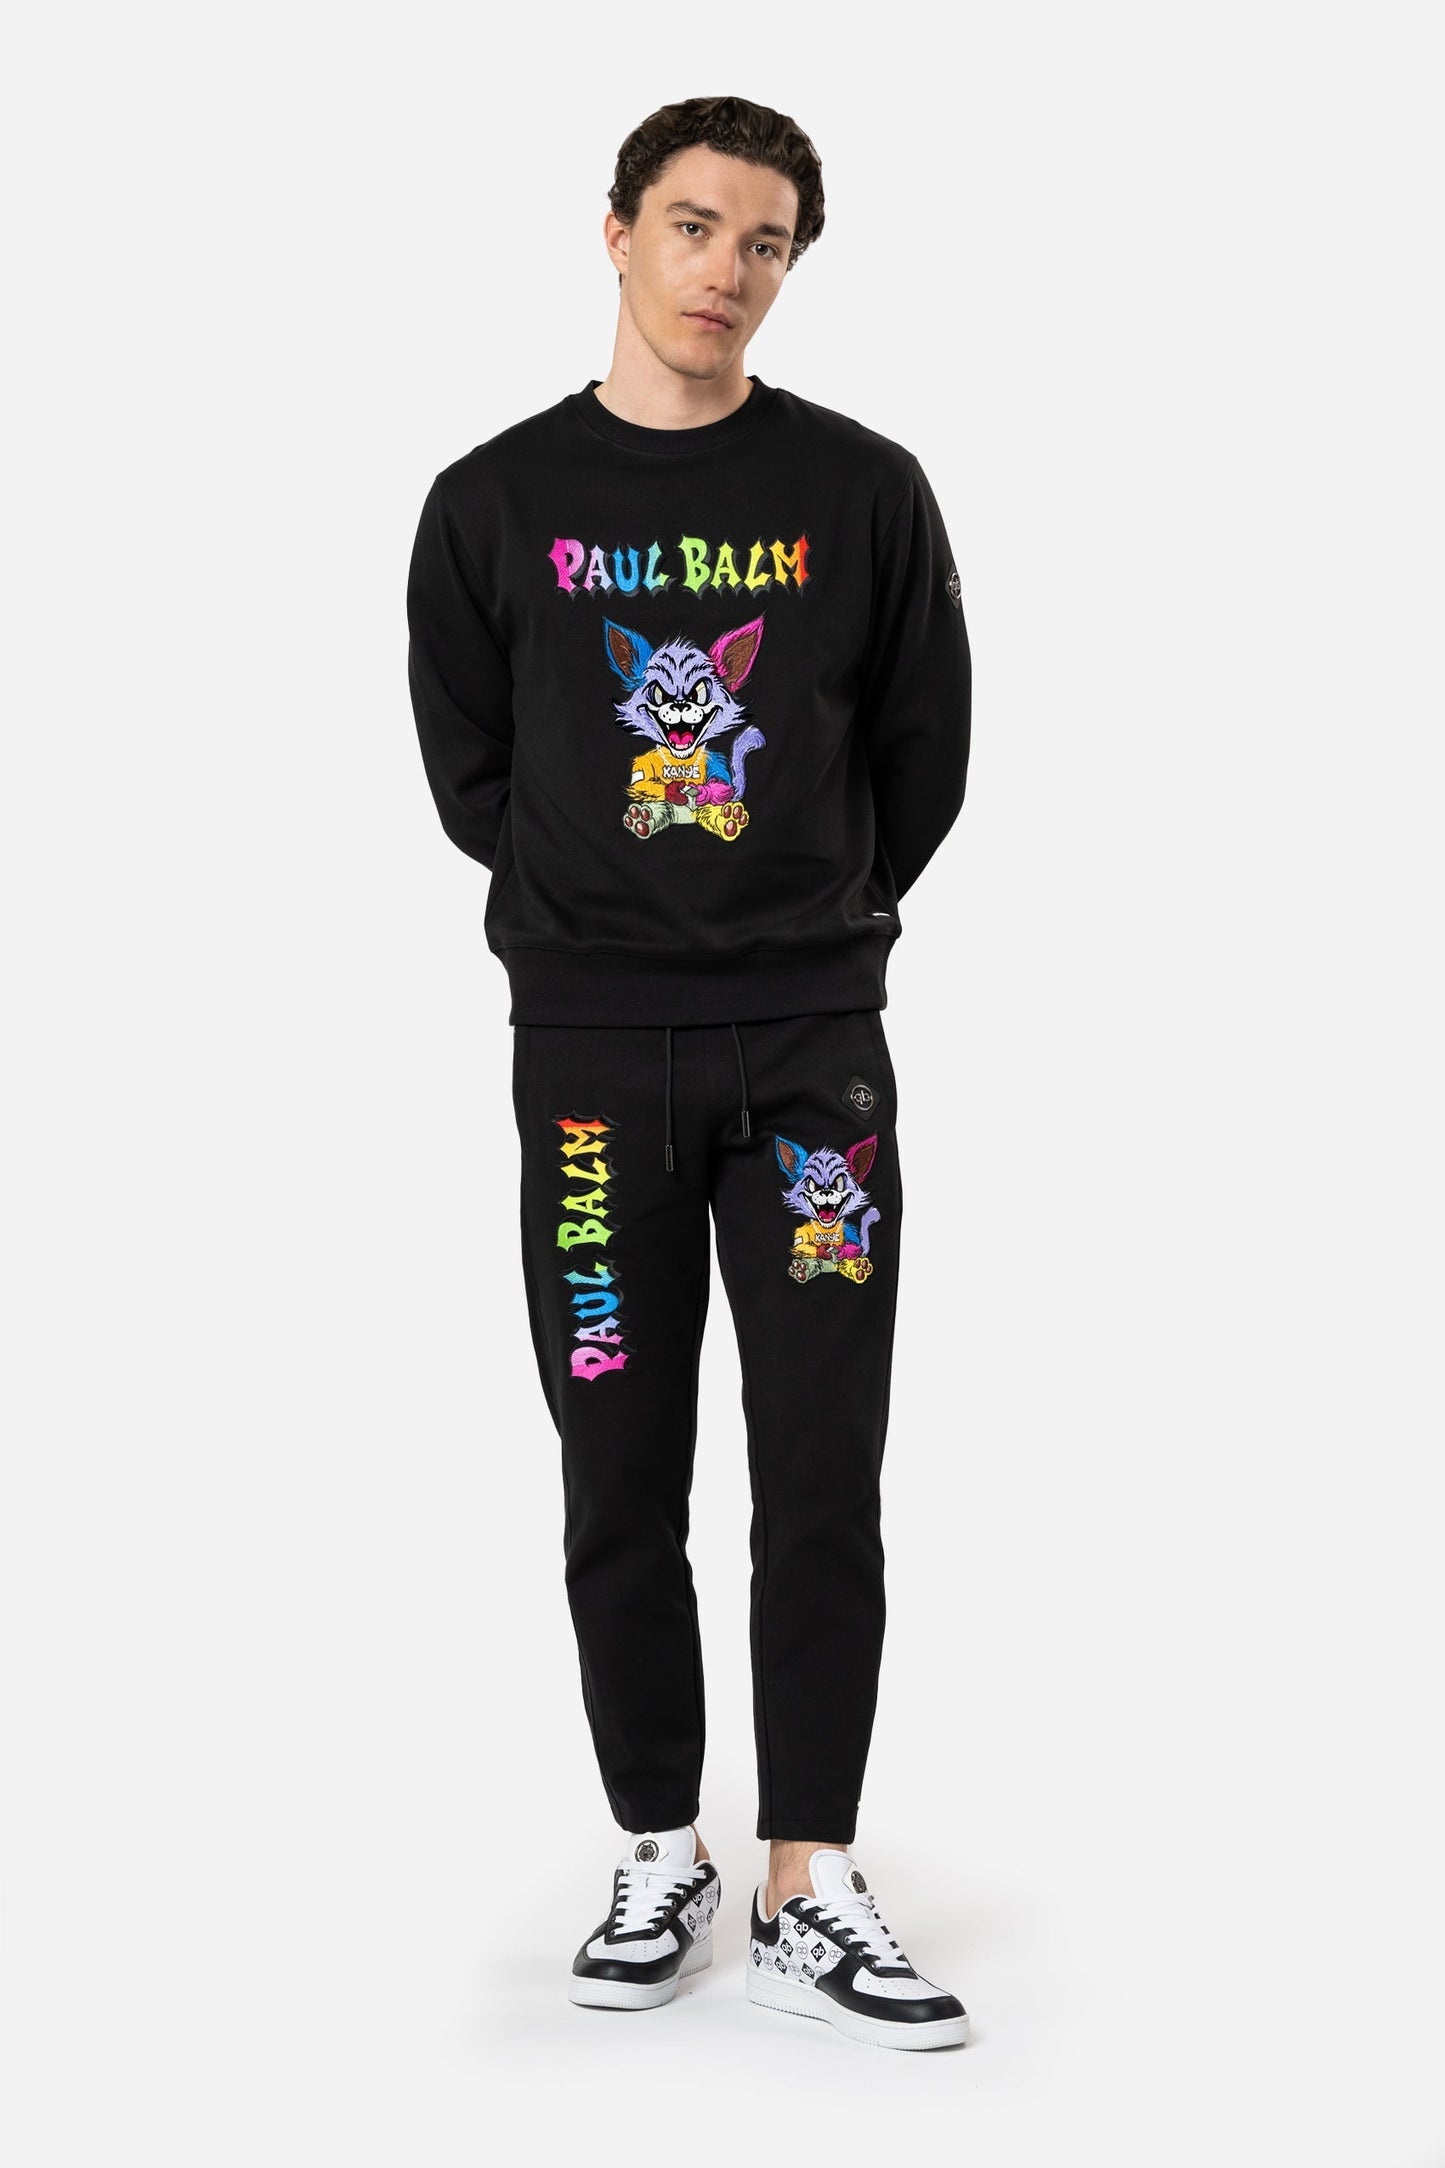 Kanye the Rainbow Cat Embroidery Sweatshirt - Limited to 300